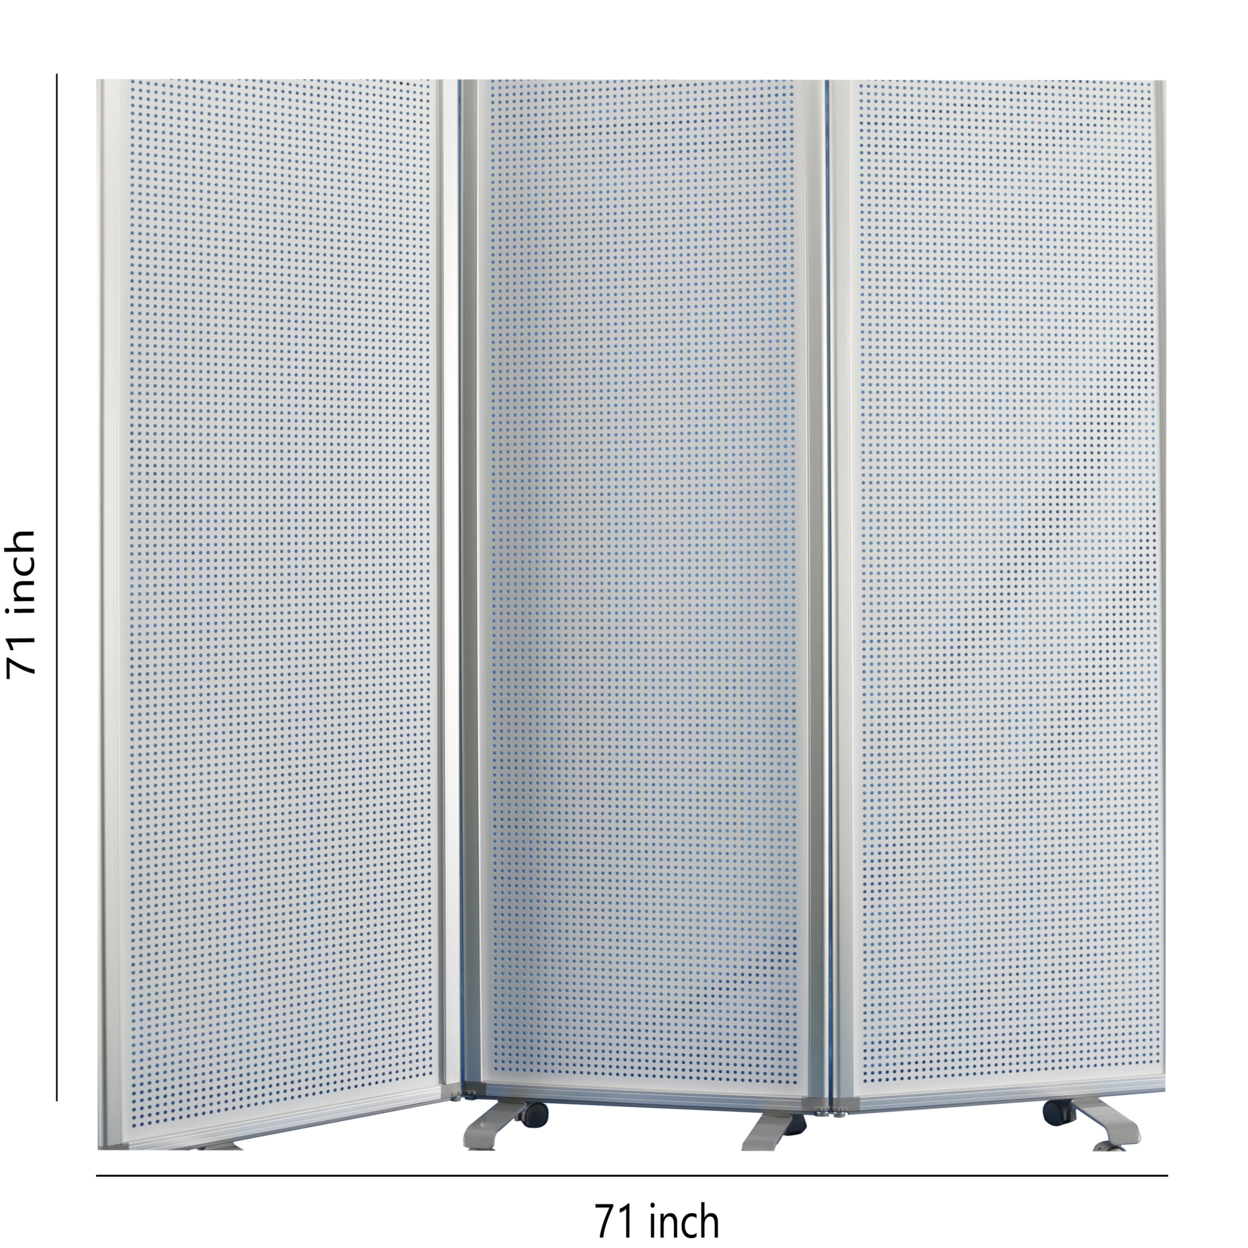 Accordion Style Metal 3 Panel Room Divider With Perforated Details, White- Saltoro Sherpi